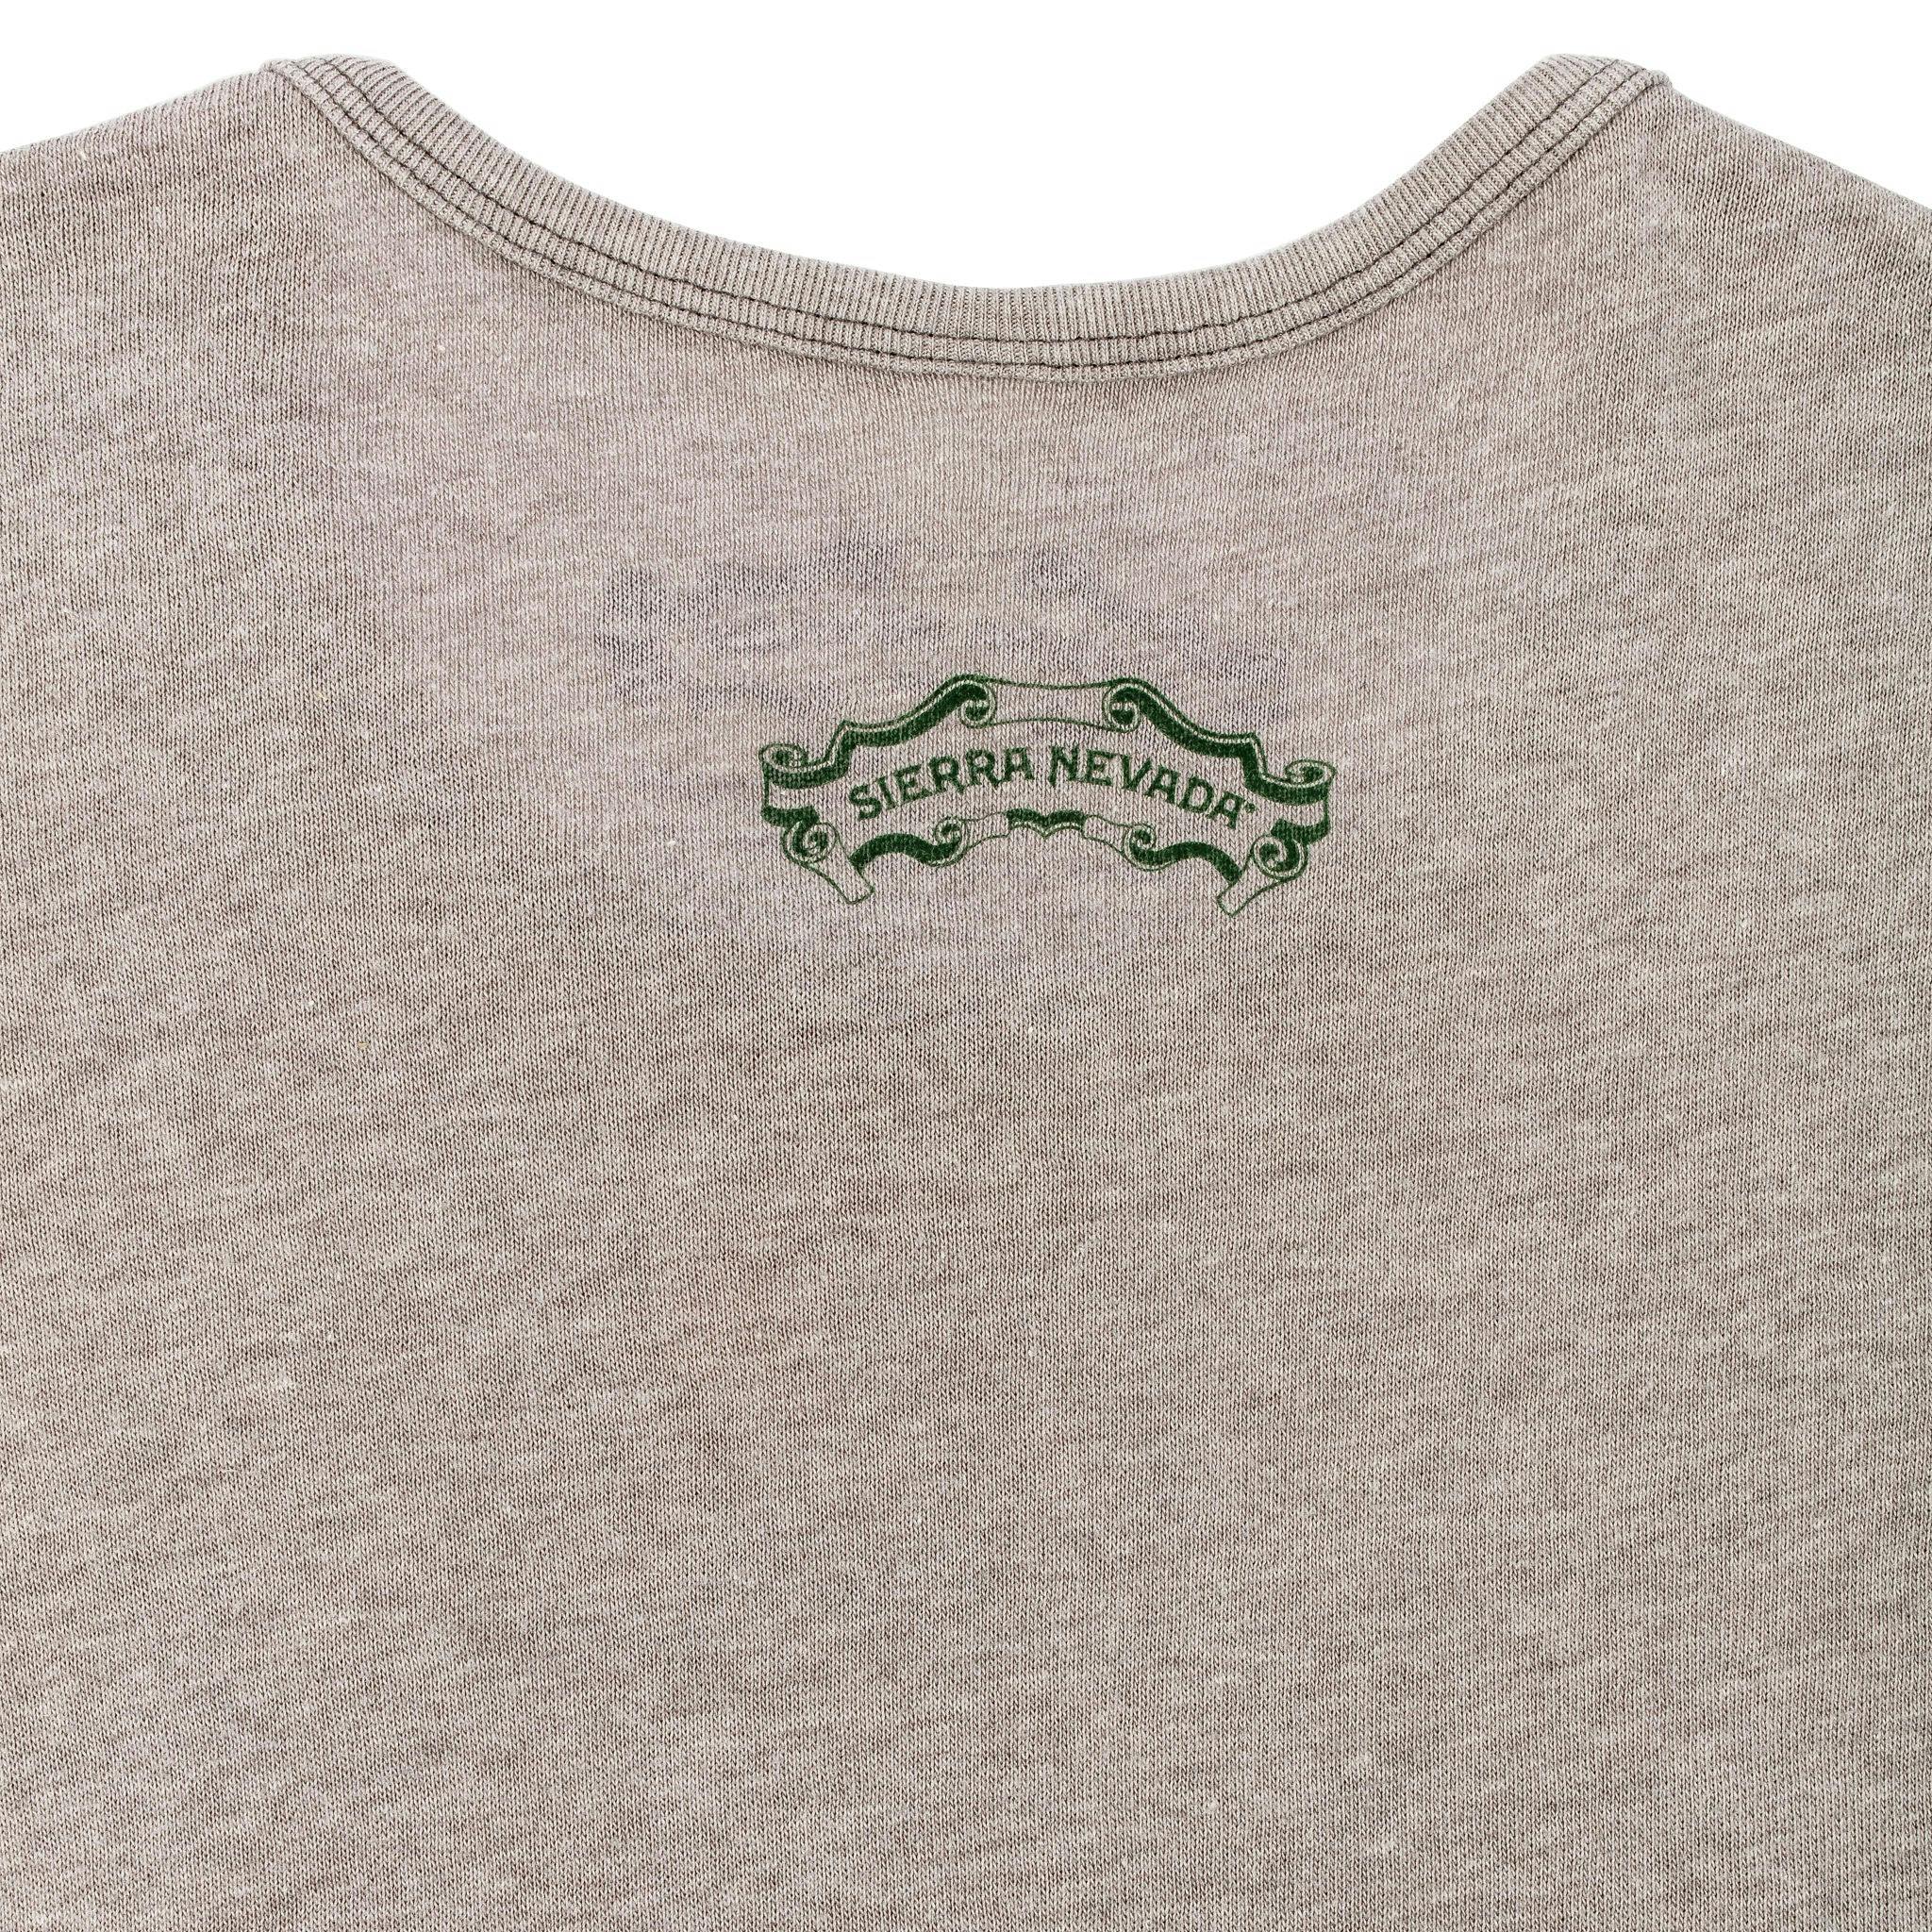 Close up of the Sierra Nevada logo on the back of the shirt.